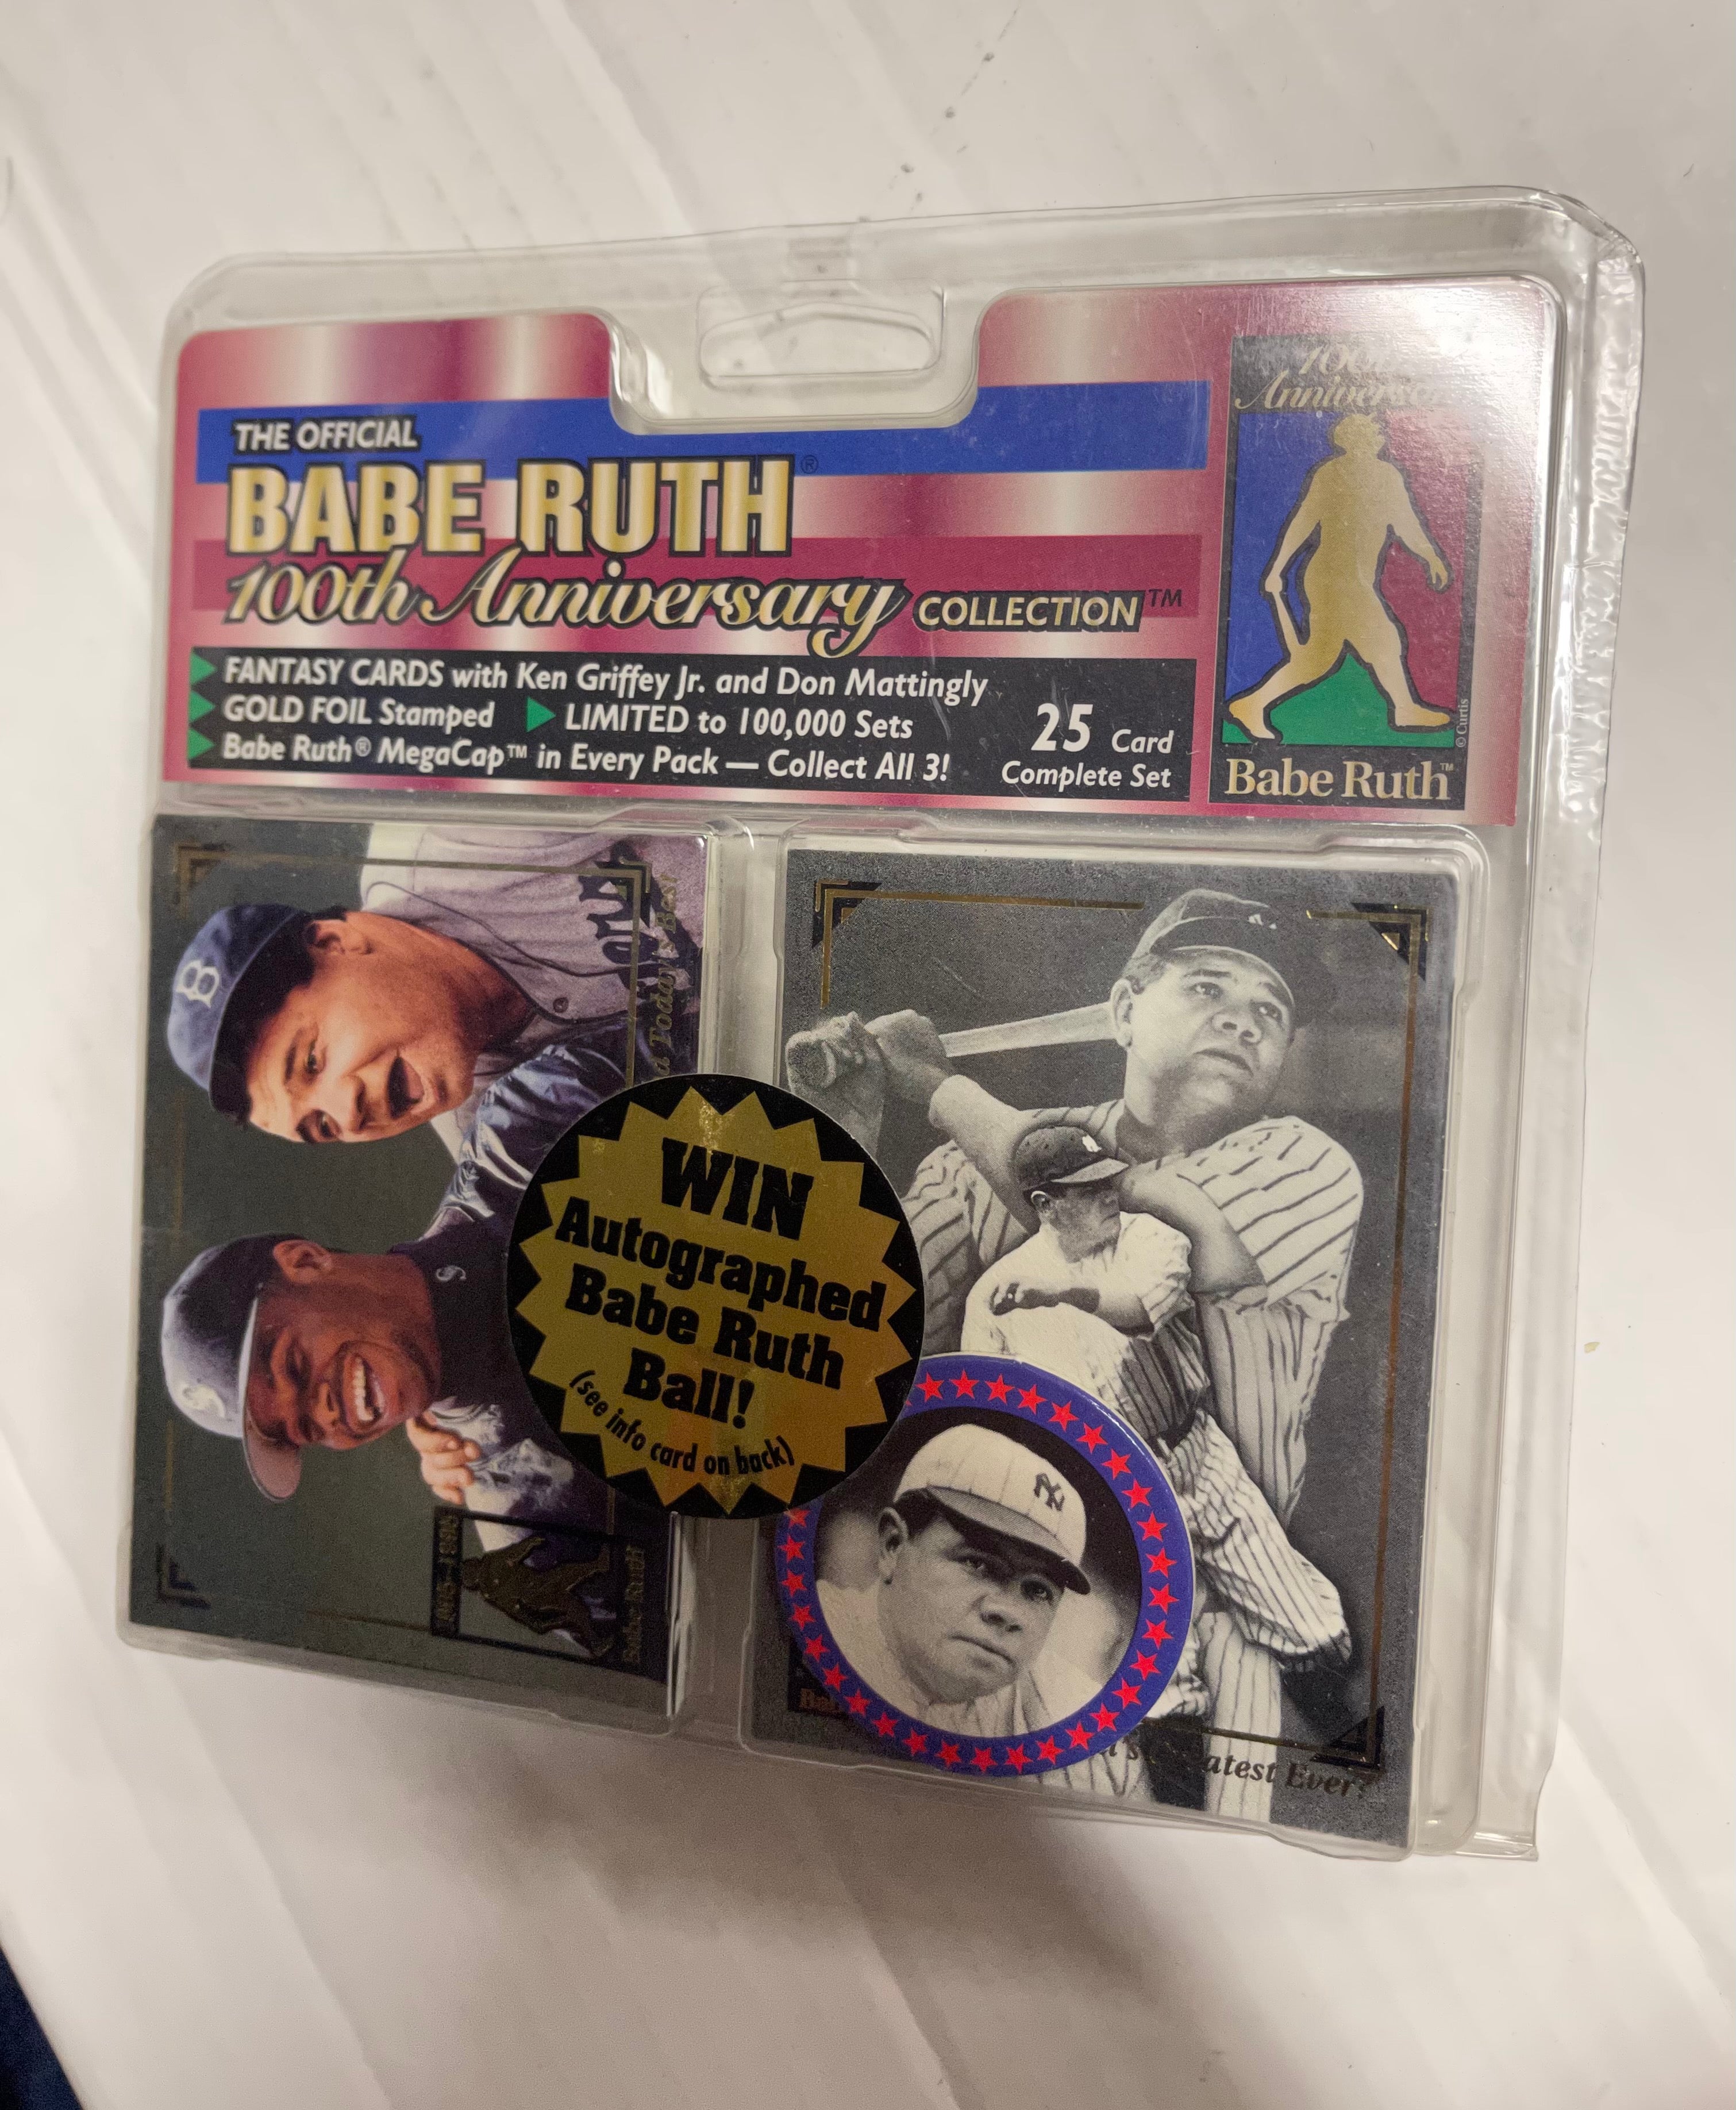 Babe Ruth baseball 100 anniversary collection factory cards set 1995